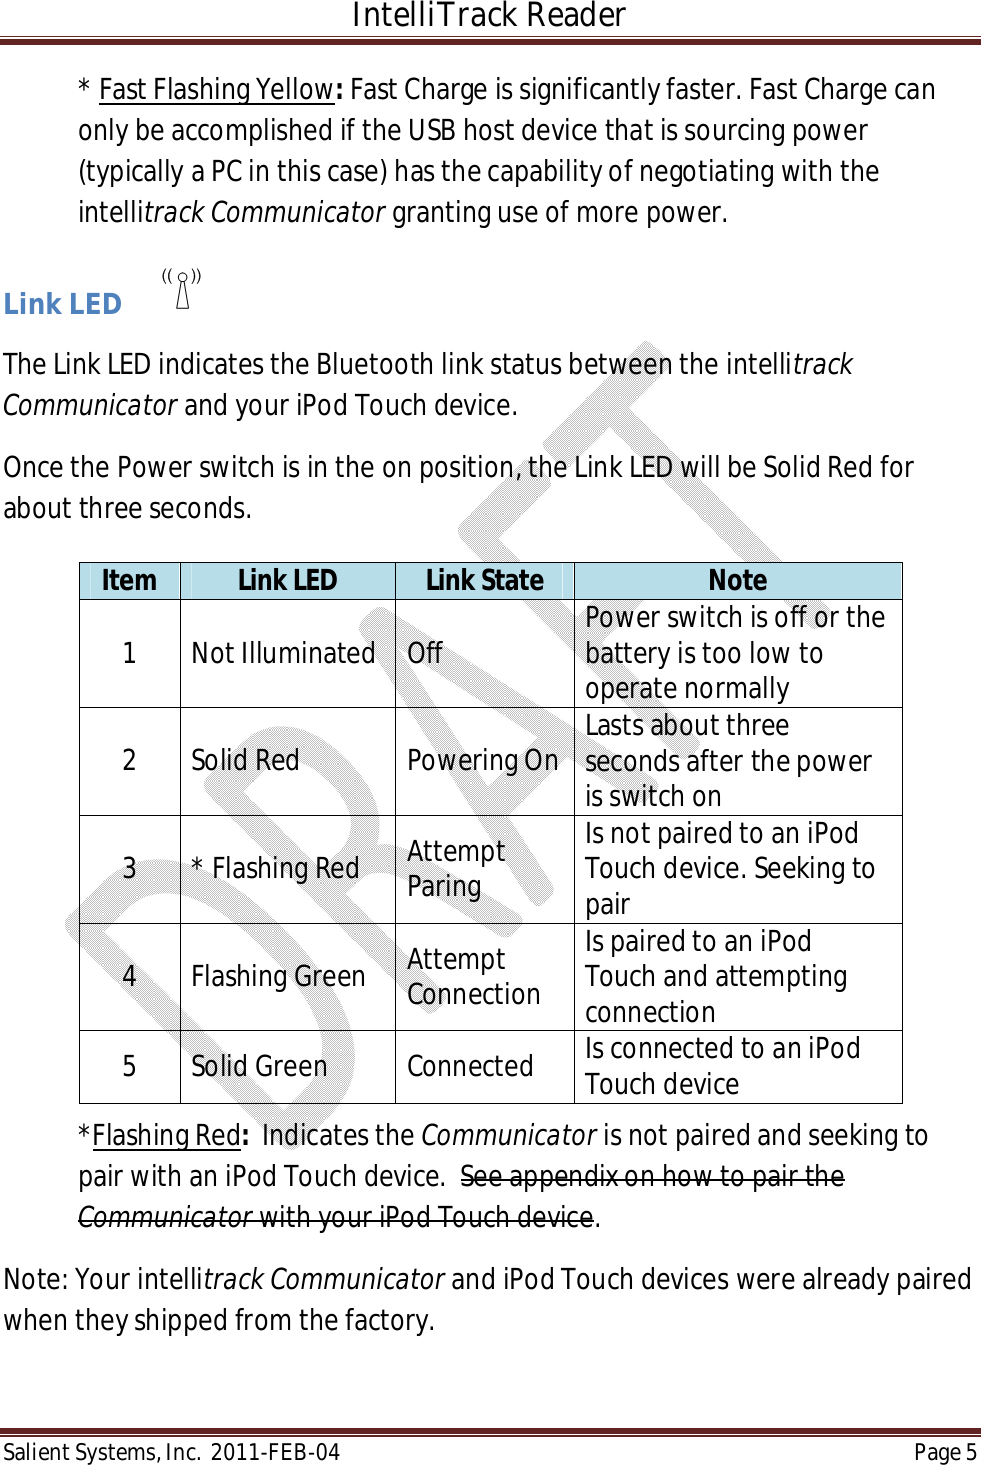 IntelliTrack Reader  Salient Systems, Inc.  2011-FEB-04 Page 5  * Fast Flashing Yellow: Fast Charge is significantly faster. Fast Charge can only be accomplished if the USB host device that is sourcing power (typically a PC in this case) has the capability of negotiating with the intellitrack Communicator granting use of more power.  Link LED        The Link LED indicates the Bluetooth link status between the intellitrack Communicator and your iPod Touch device. Once the Power switch is in the on position, the Link LED will be Solid Red for about three seconds.       *Flashing Red:  Indicates the Communicator is not paired and seeking to pair with an iPod Touch device.  See appendix on how to pair the Communicator with your iPod Touch device.  Note: Your intellitrack Communicator and iPod Touch devices were already paired when they shipped from the factory.  Item  Link LED  Link State  Note 1  Not Illuminated  Off  Power switch is off or the battery is too low to operate normally 2  Solid Red  Powering On Lasts about three seconds after the power is switch on 3  * Flashing Red  Attempt Paring Is not paired to an iPod Touch device. Seeking to pair 4  Flashing Green  Attempt Connection Is paired to an iPod Touch and attempting connection 5  Solid Green  Connected  Is connected to an iPod Touch device 